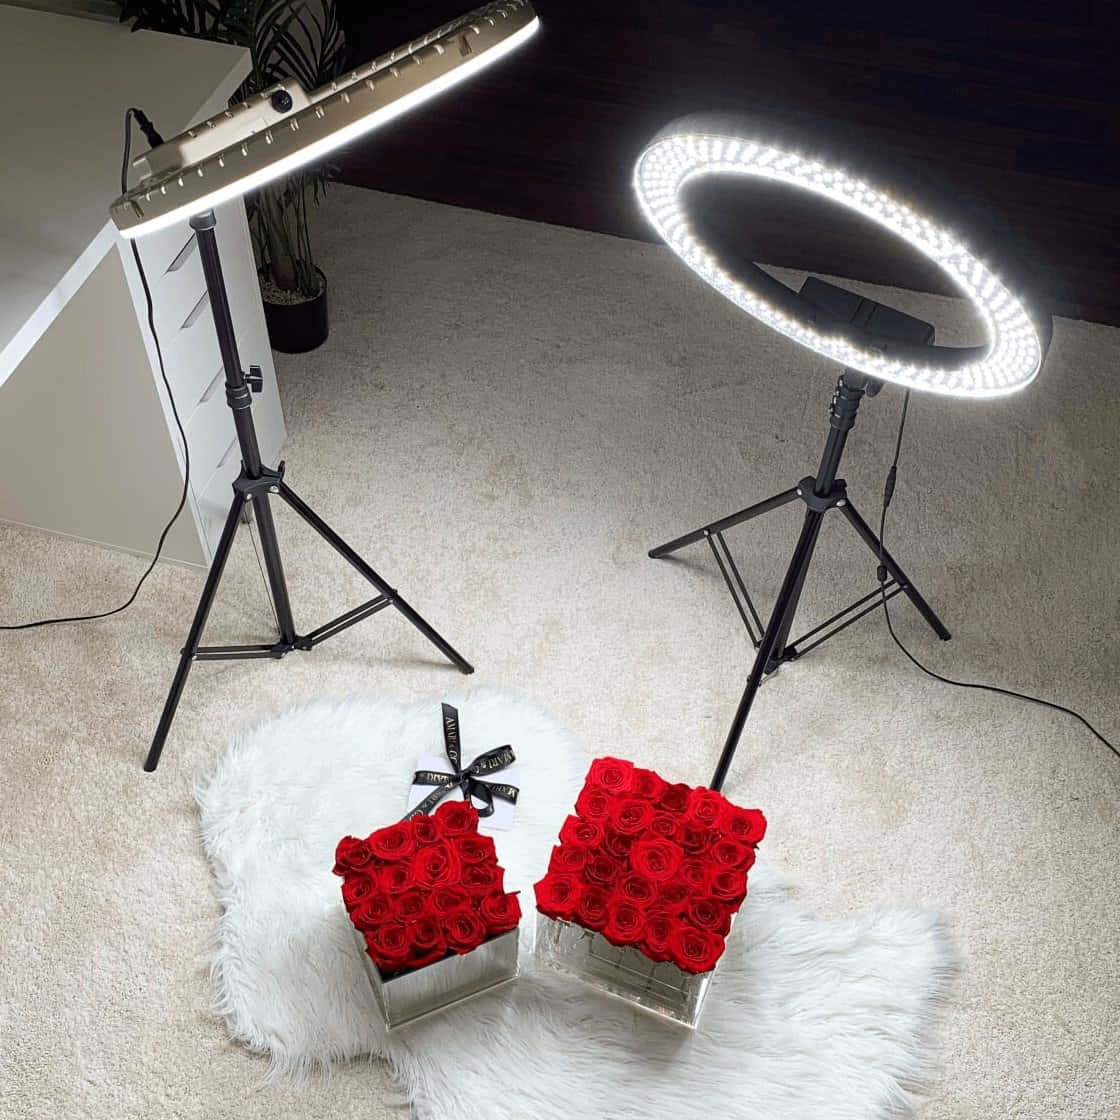 Light Up Your World with a Ring Light